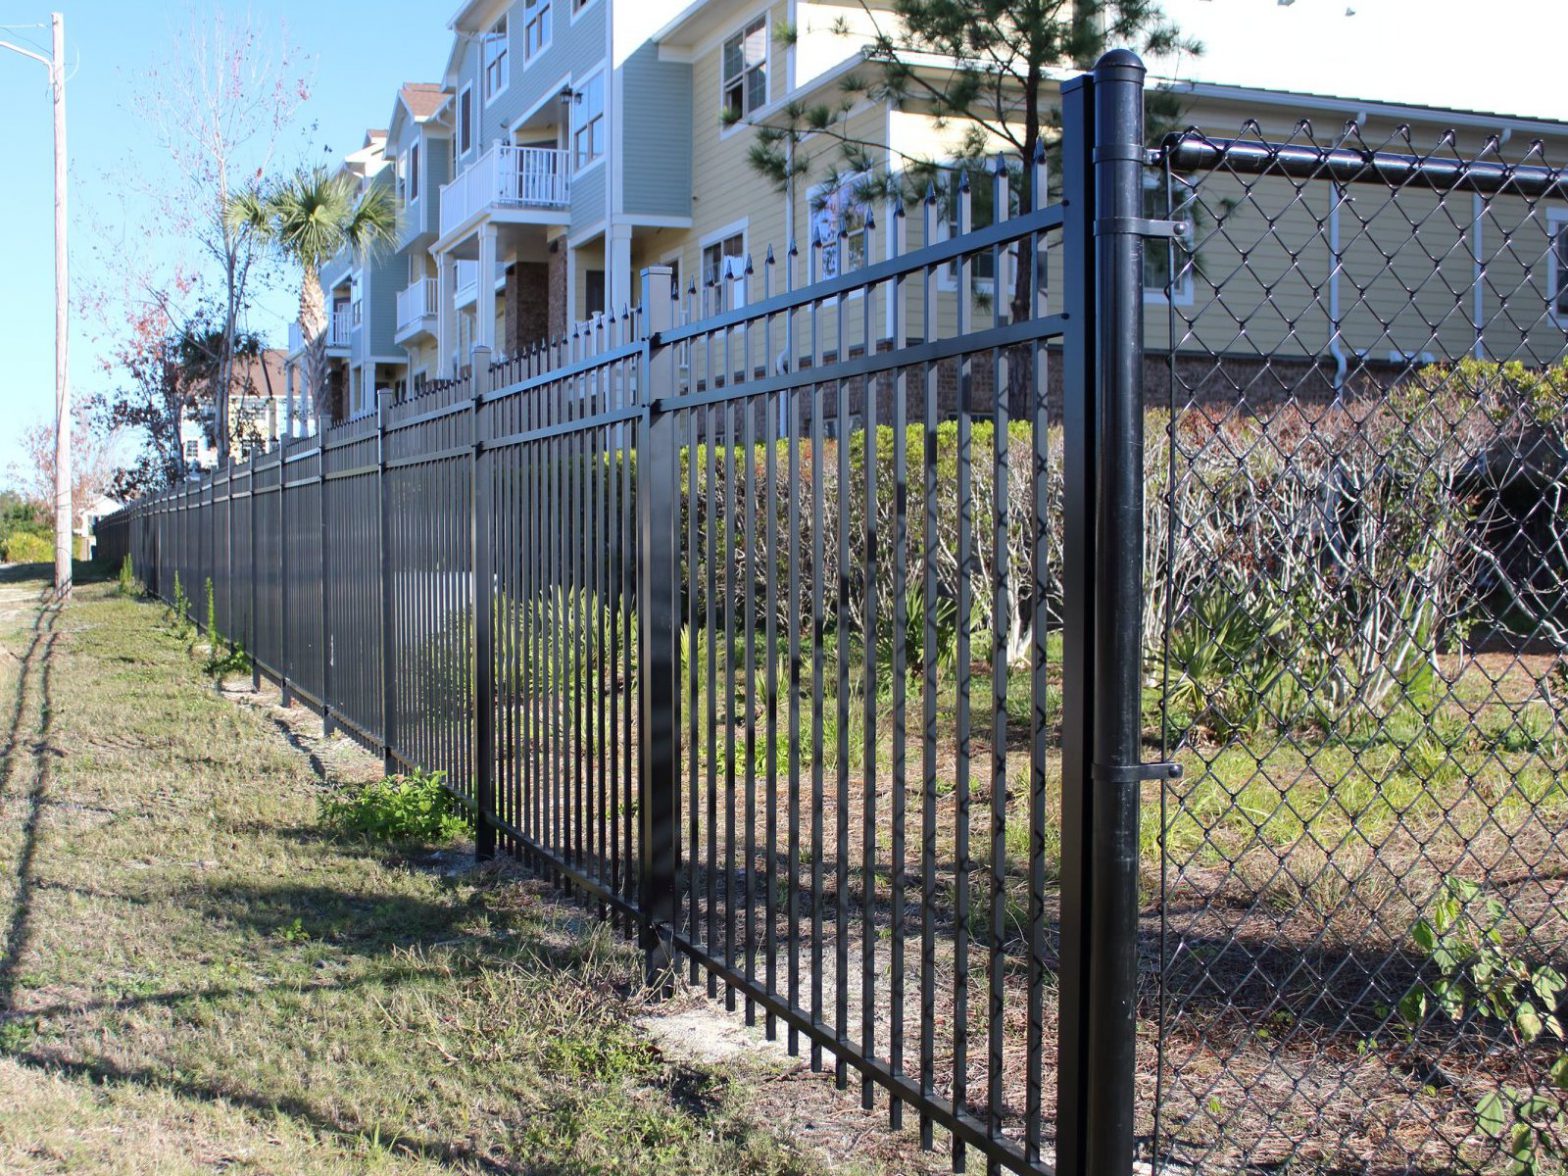 Photo of a black aluminum fence and chain link fence